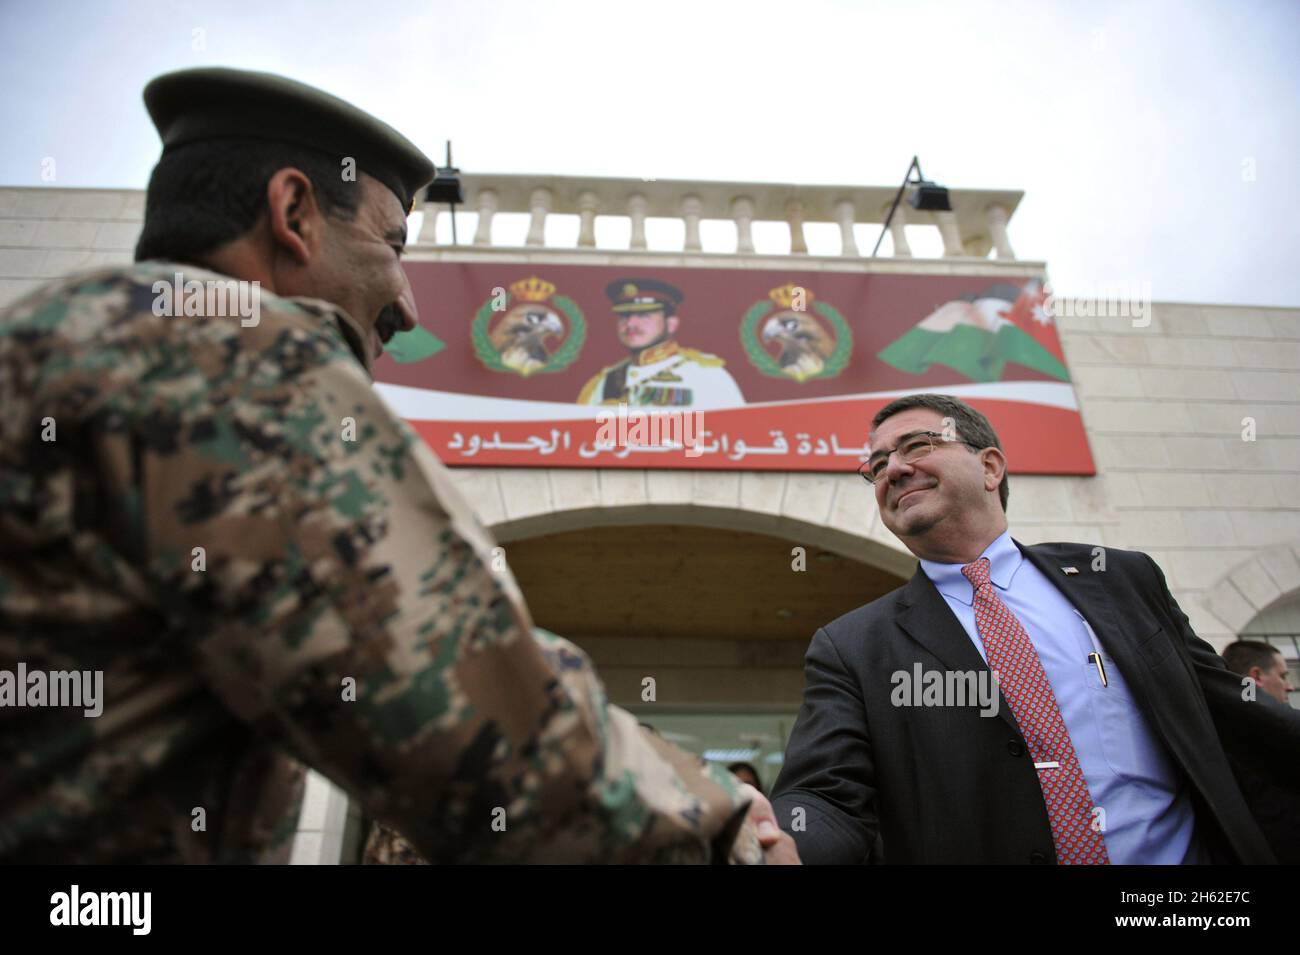 Deputy Secretary of Defense Ashton Carter shakes hands with General Hussein Al Zyoud, commander of Jordan's border guard security forces after meeting with him Amman, Jordan, Feb. 5, 2013, to discuss Jordan's border security efforts in the shadow of the ongoing civil conflict in neighboring Seria. Stock Photo